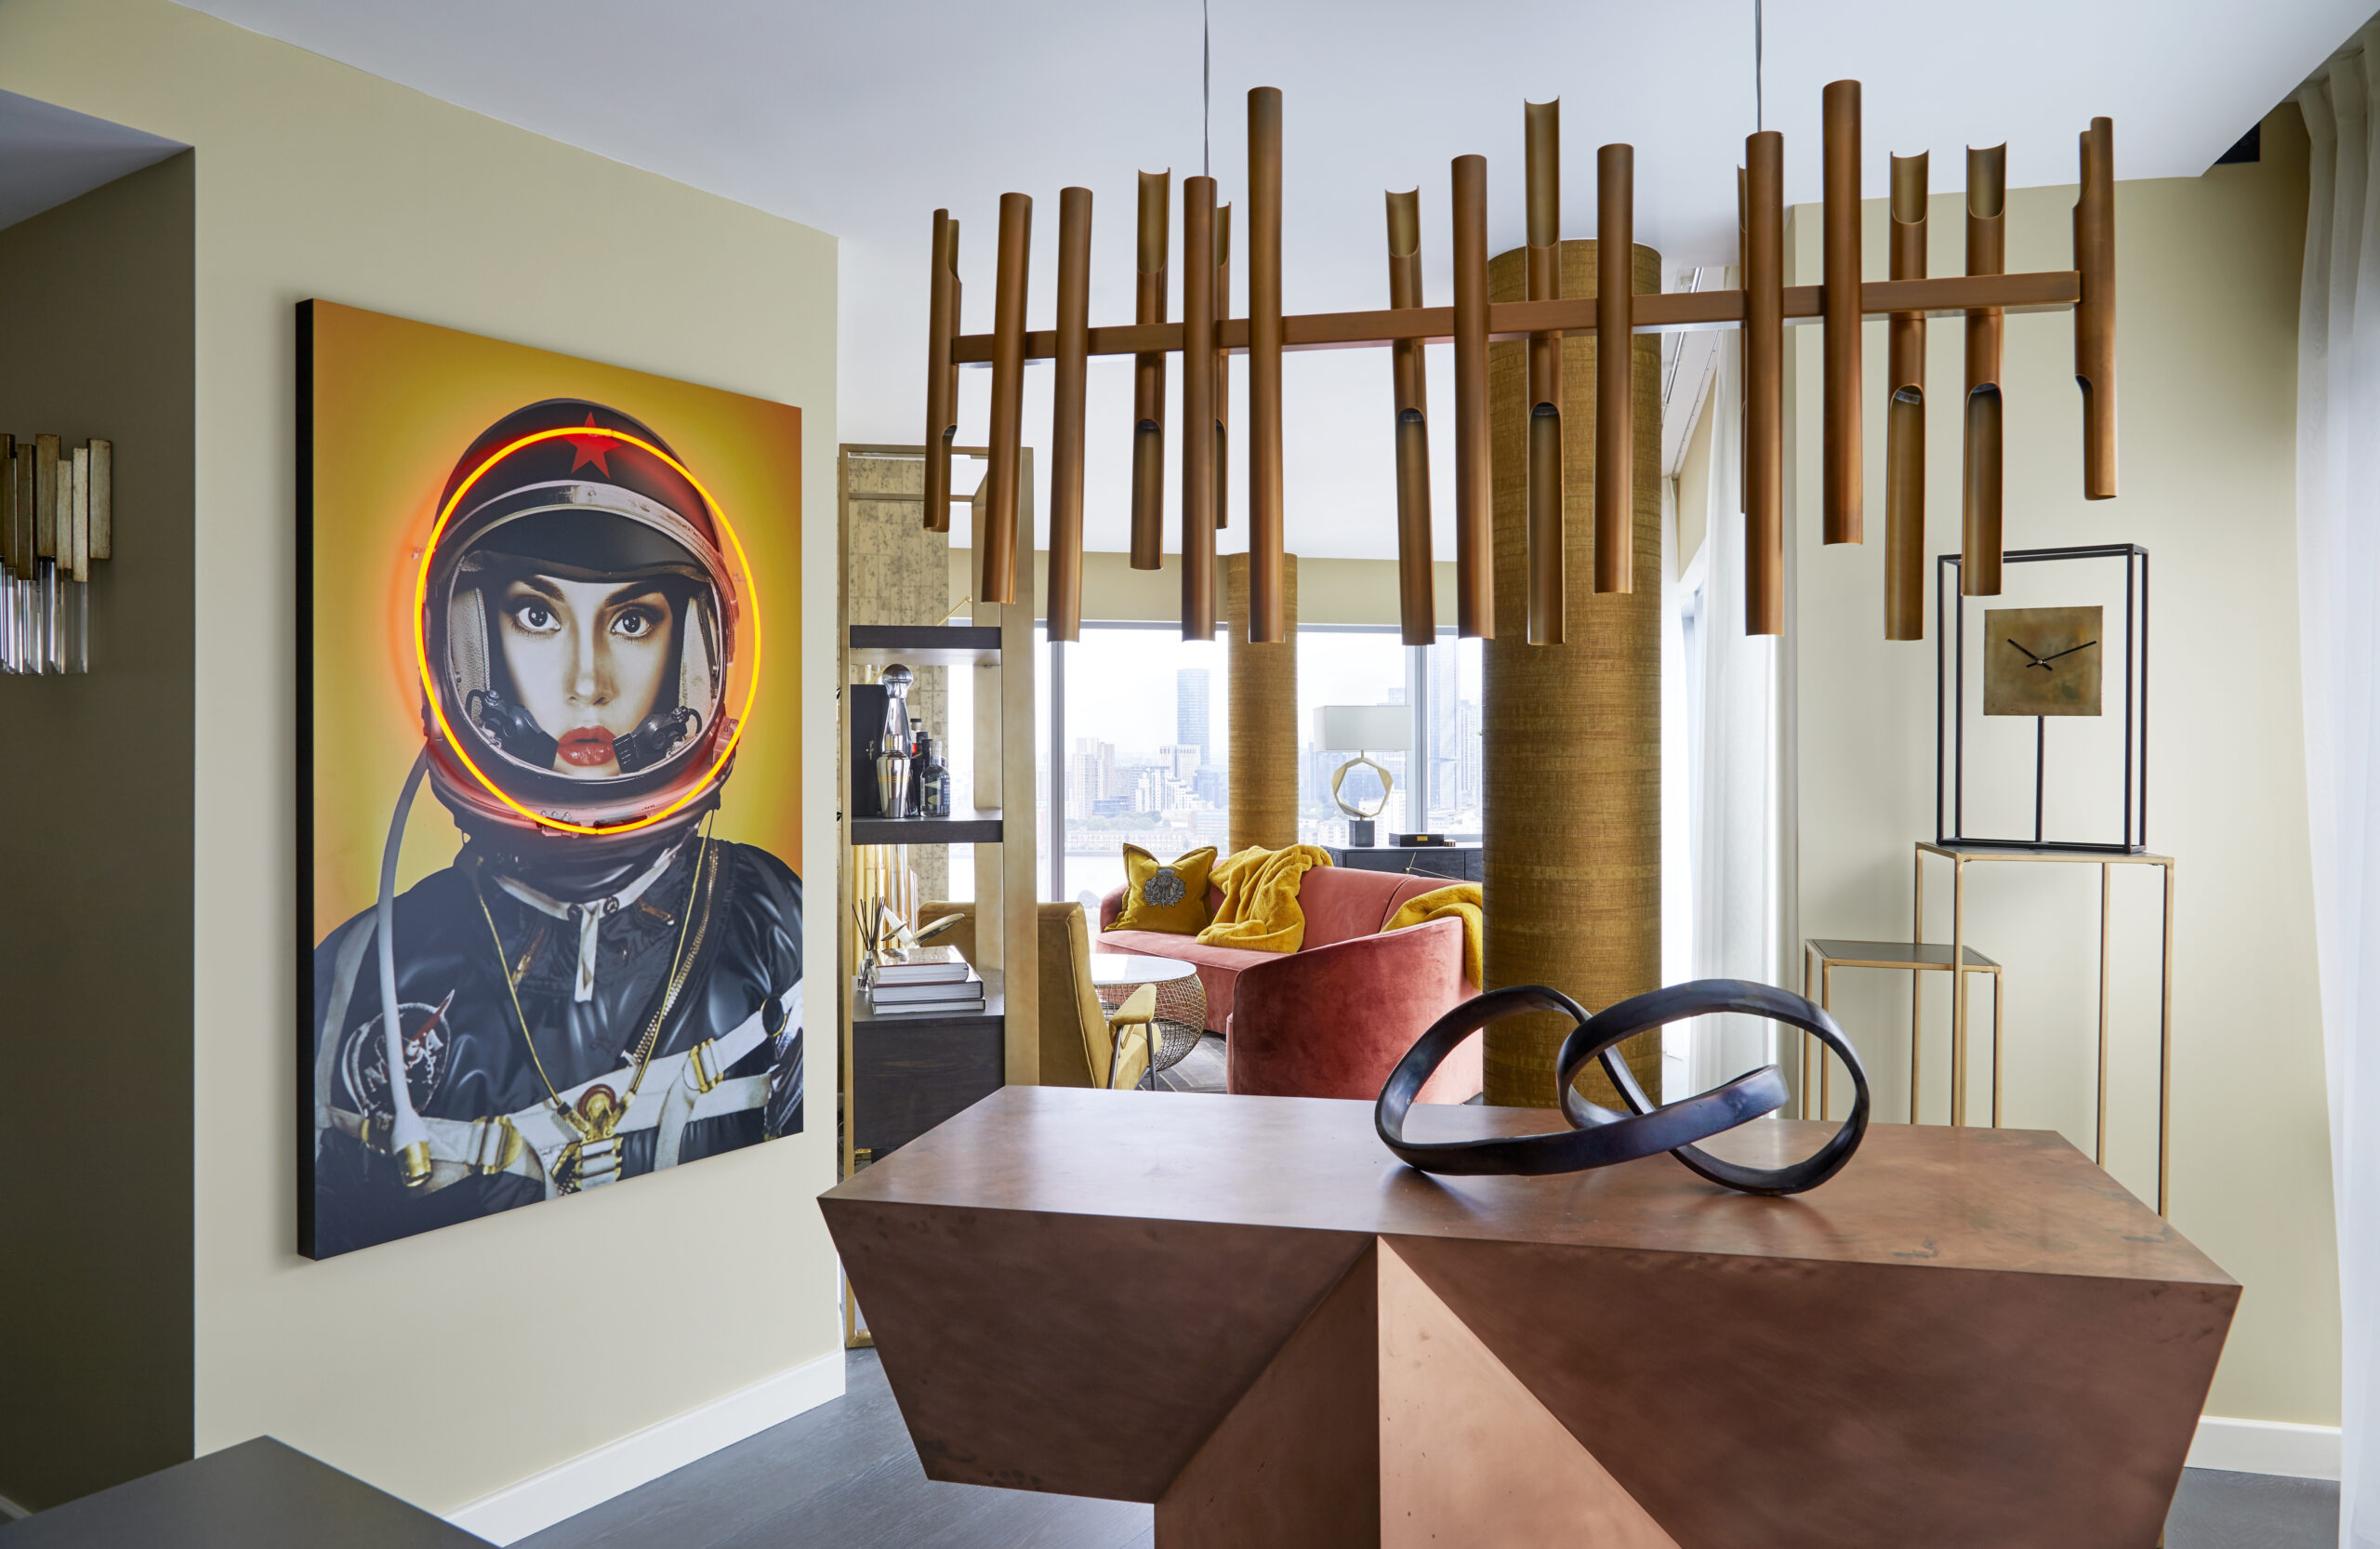 The dining area of the Greenwich Penthouse featuring a Flute Brass Long Chandelier from RV Astley, adding dramatic elegance, and a Space Girl Neon Artwork from Andrew Martin, bringing playful humour and urban cool to the room.